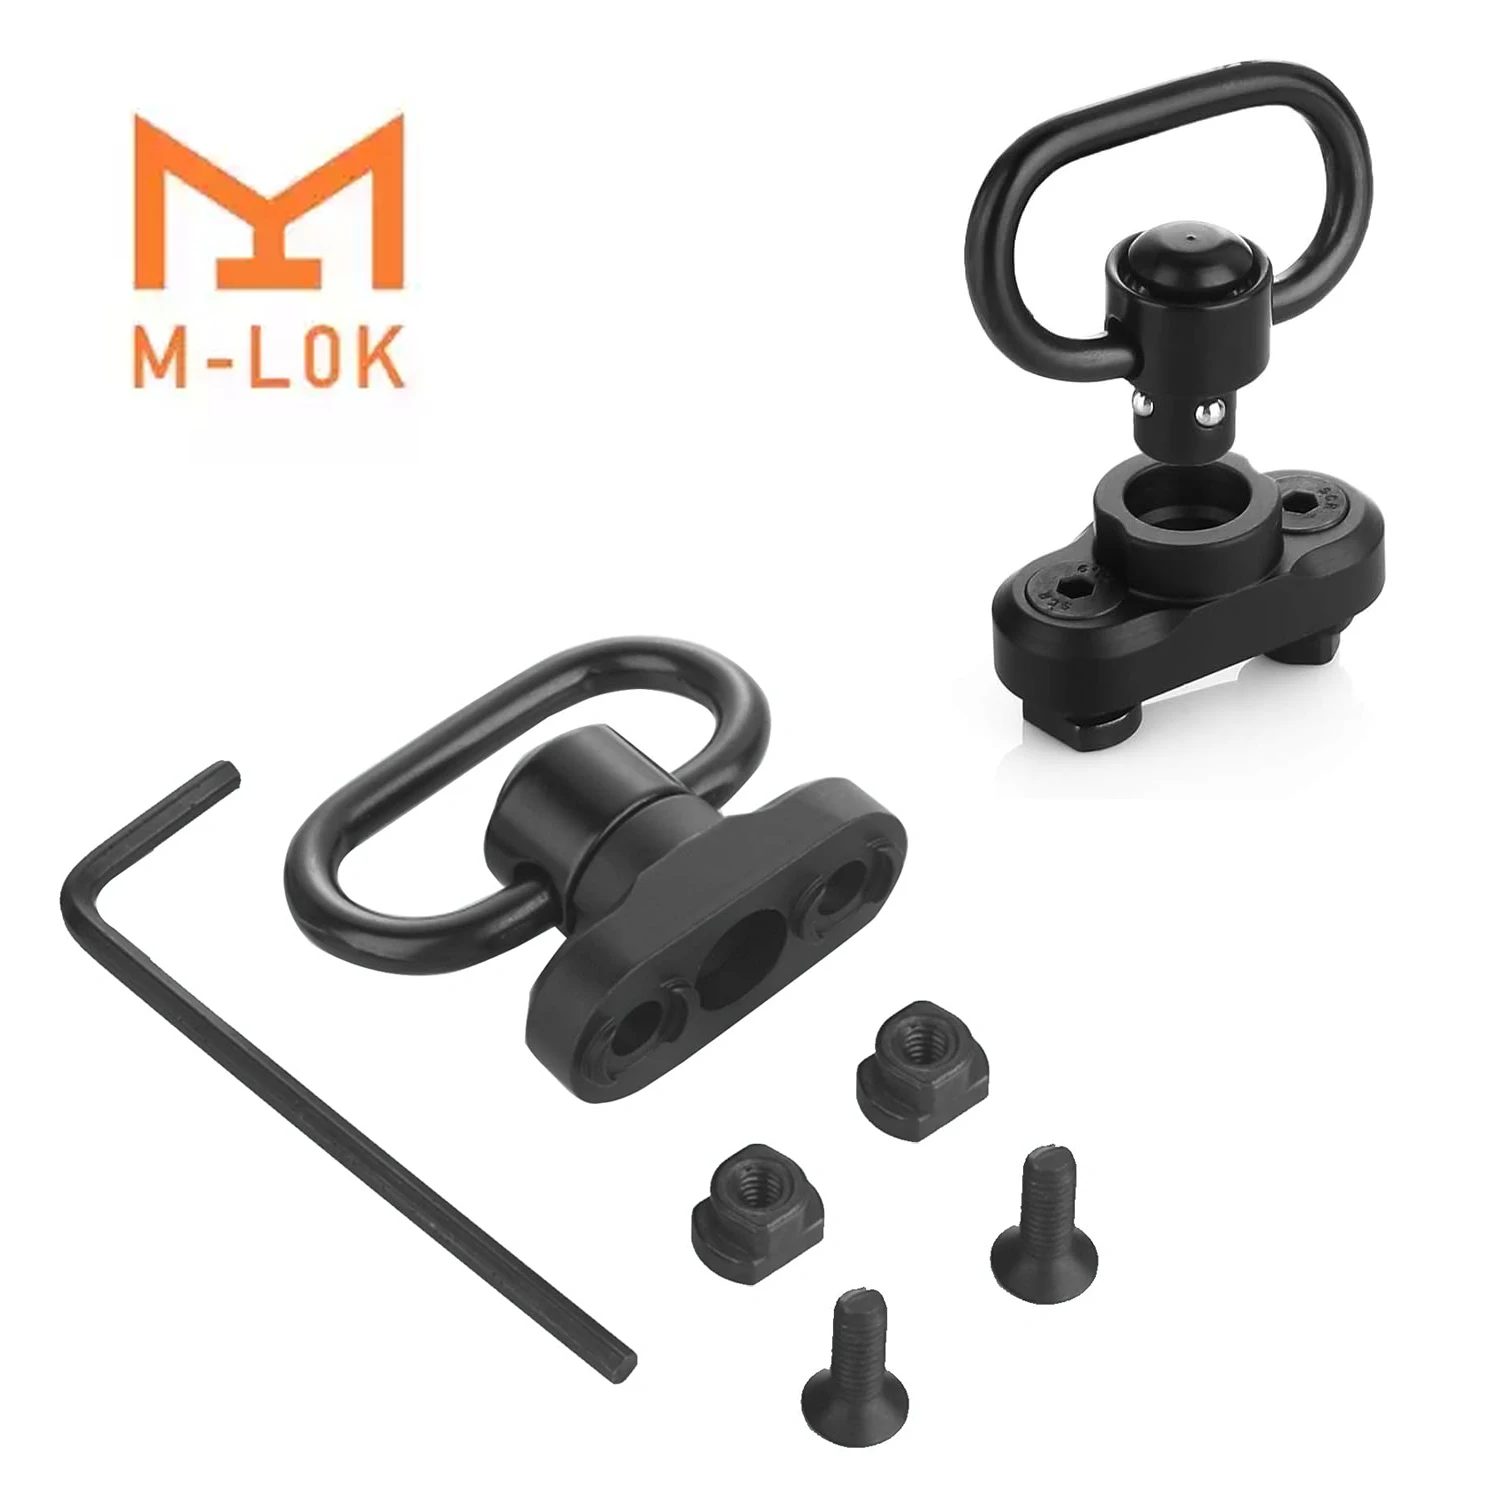 

1.25” QD Sling Swivel Mount Heavy Duty Quick Detach Push Button Swivels for M-LOK Two Point Sling 360°Rotatable Easy to Mount QD